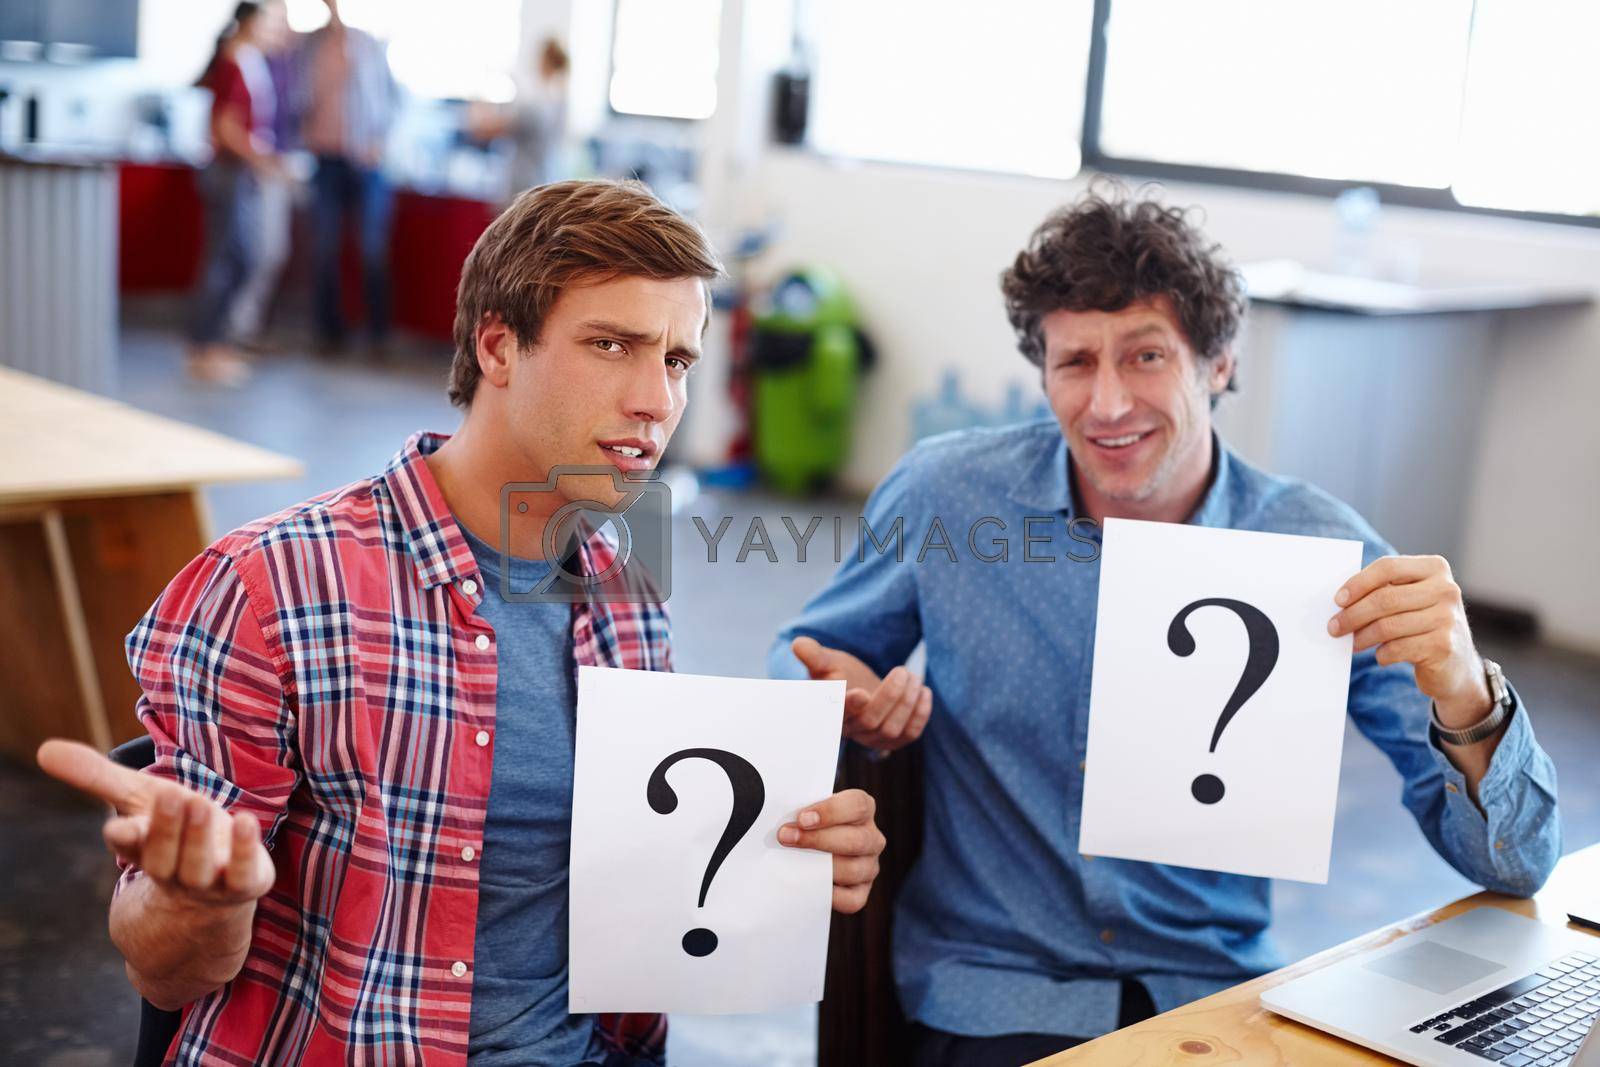 Royalty free image of Business is full of questions. Portrait of two coworkers looking confused while holding question mark signs. by YuriArcurs